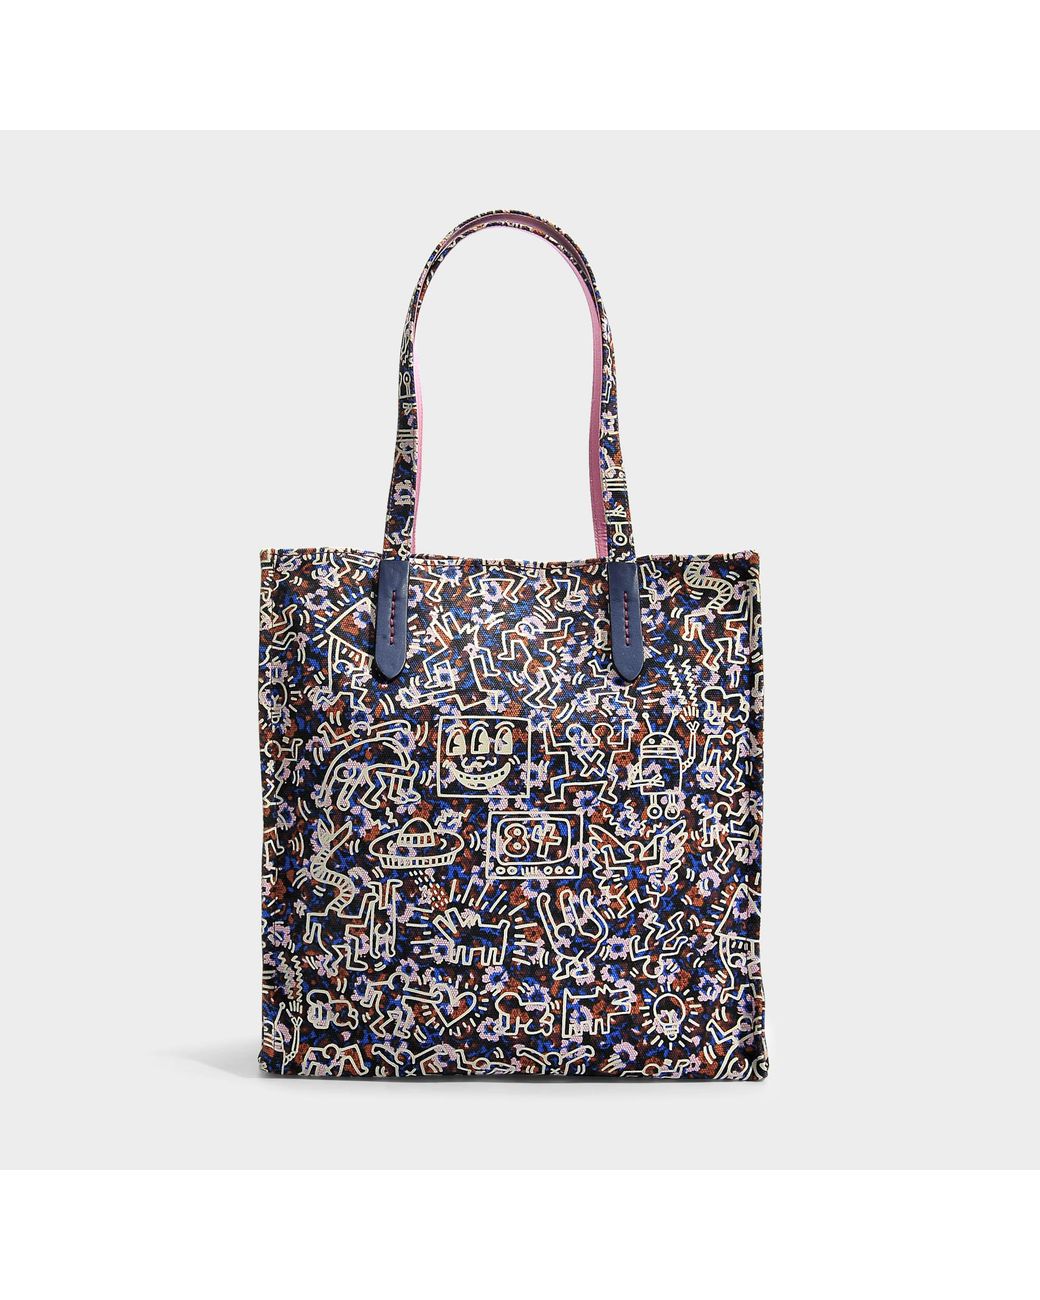 COACH Keith Haring Tote Bag In Dark Royal Canvas | Lyst